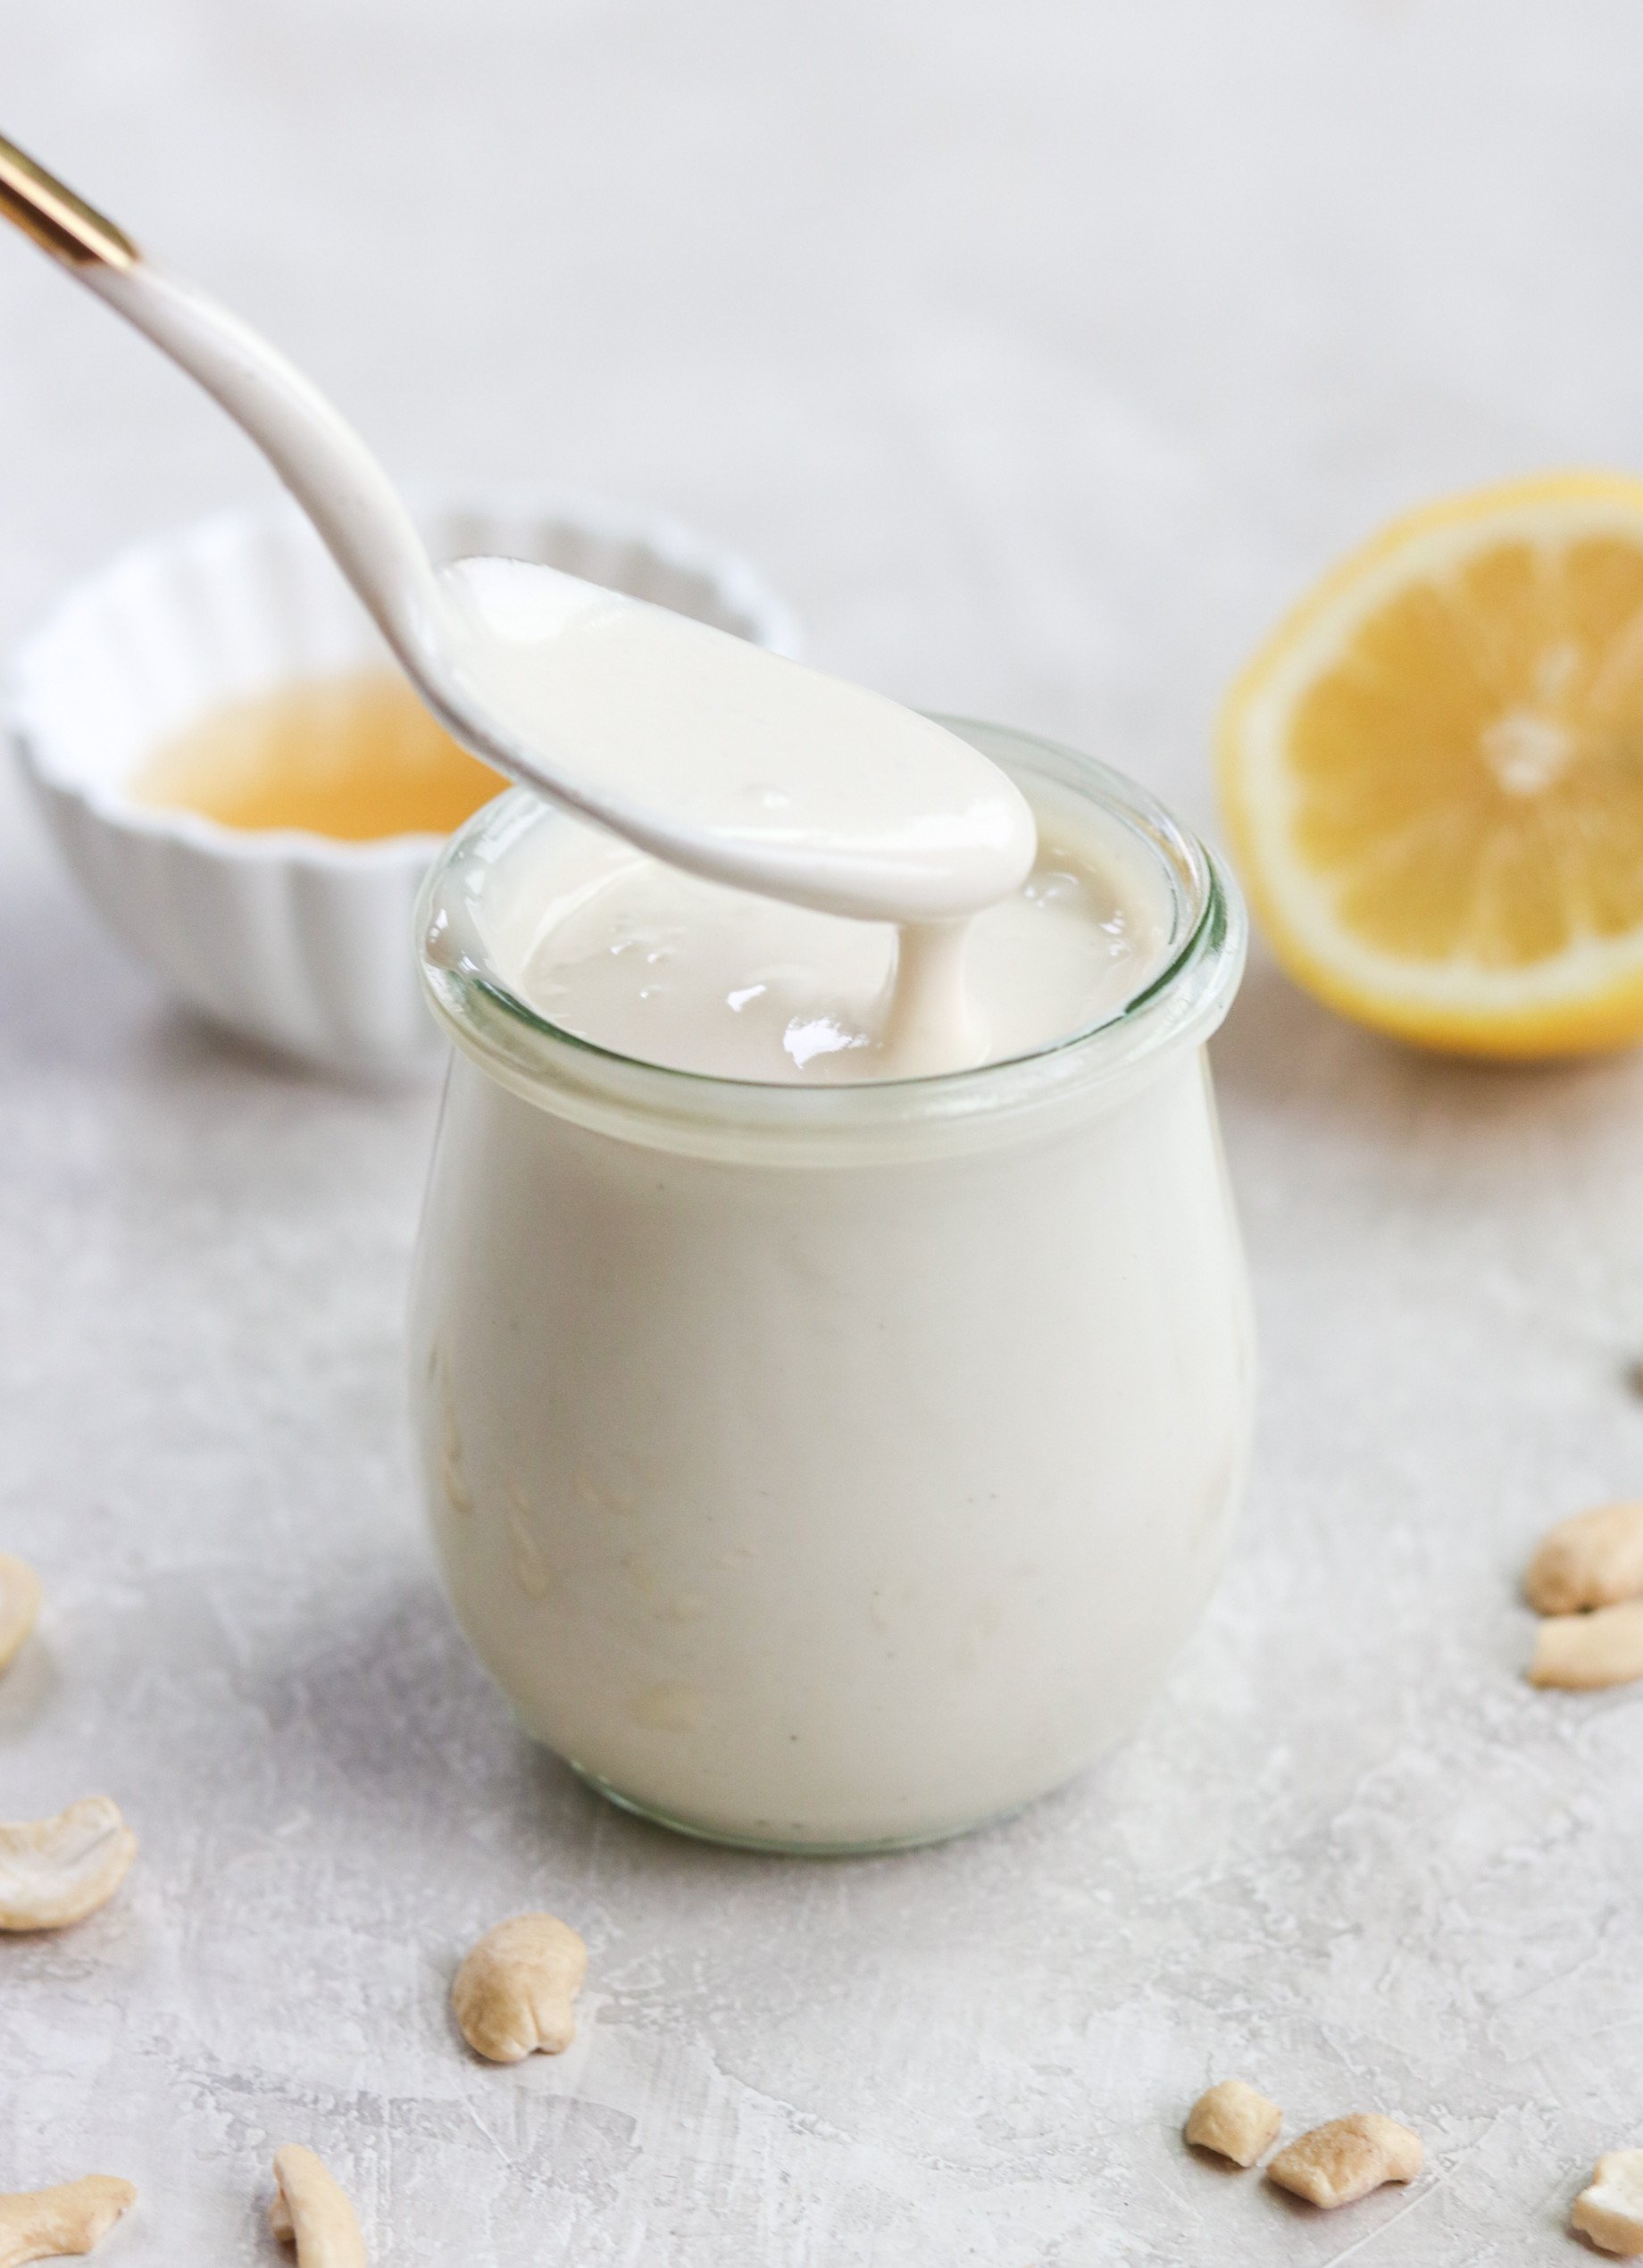 gold spoon lifting some dairy free sour cream out of a jar